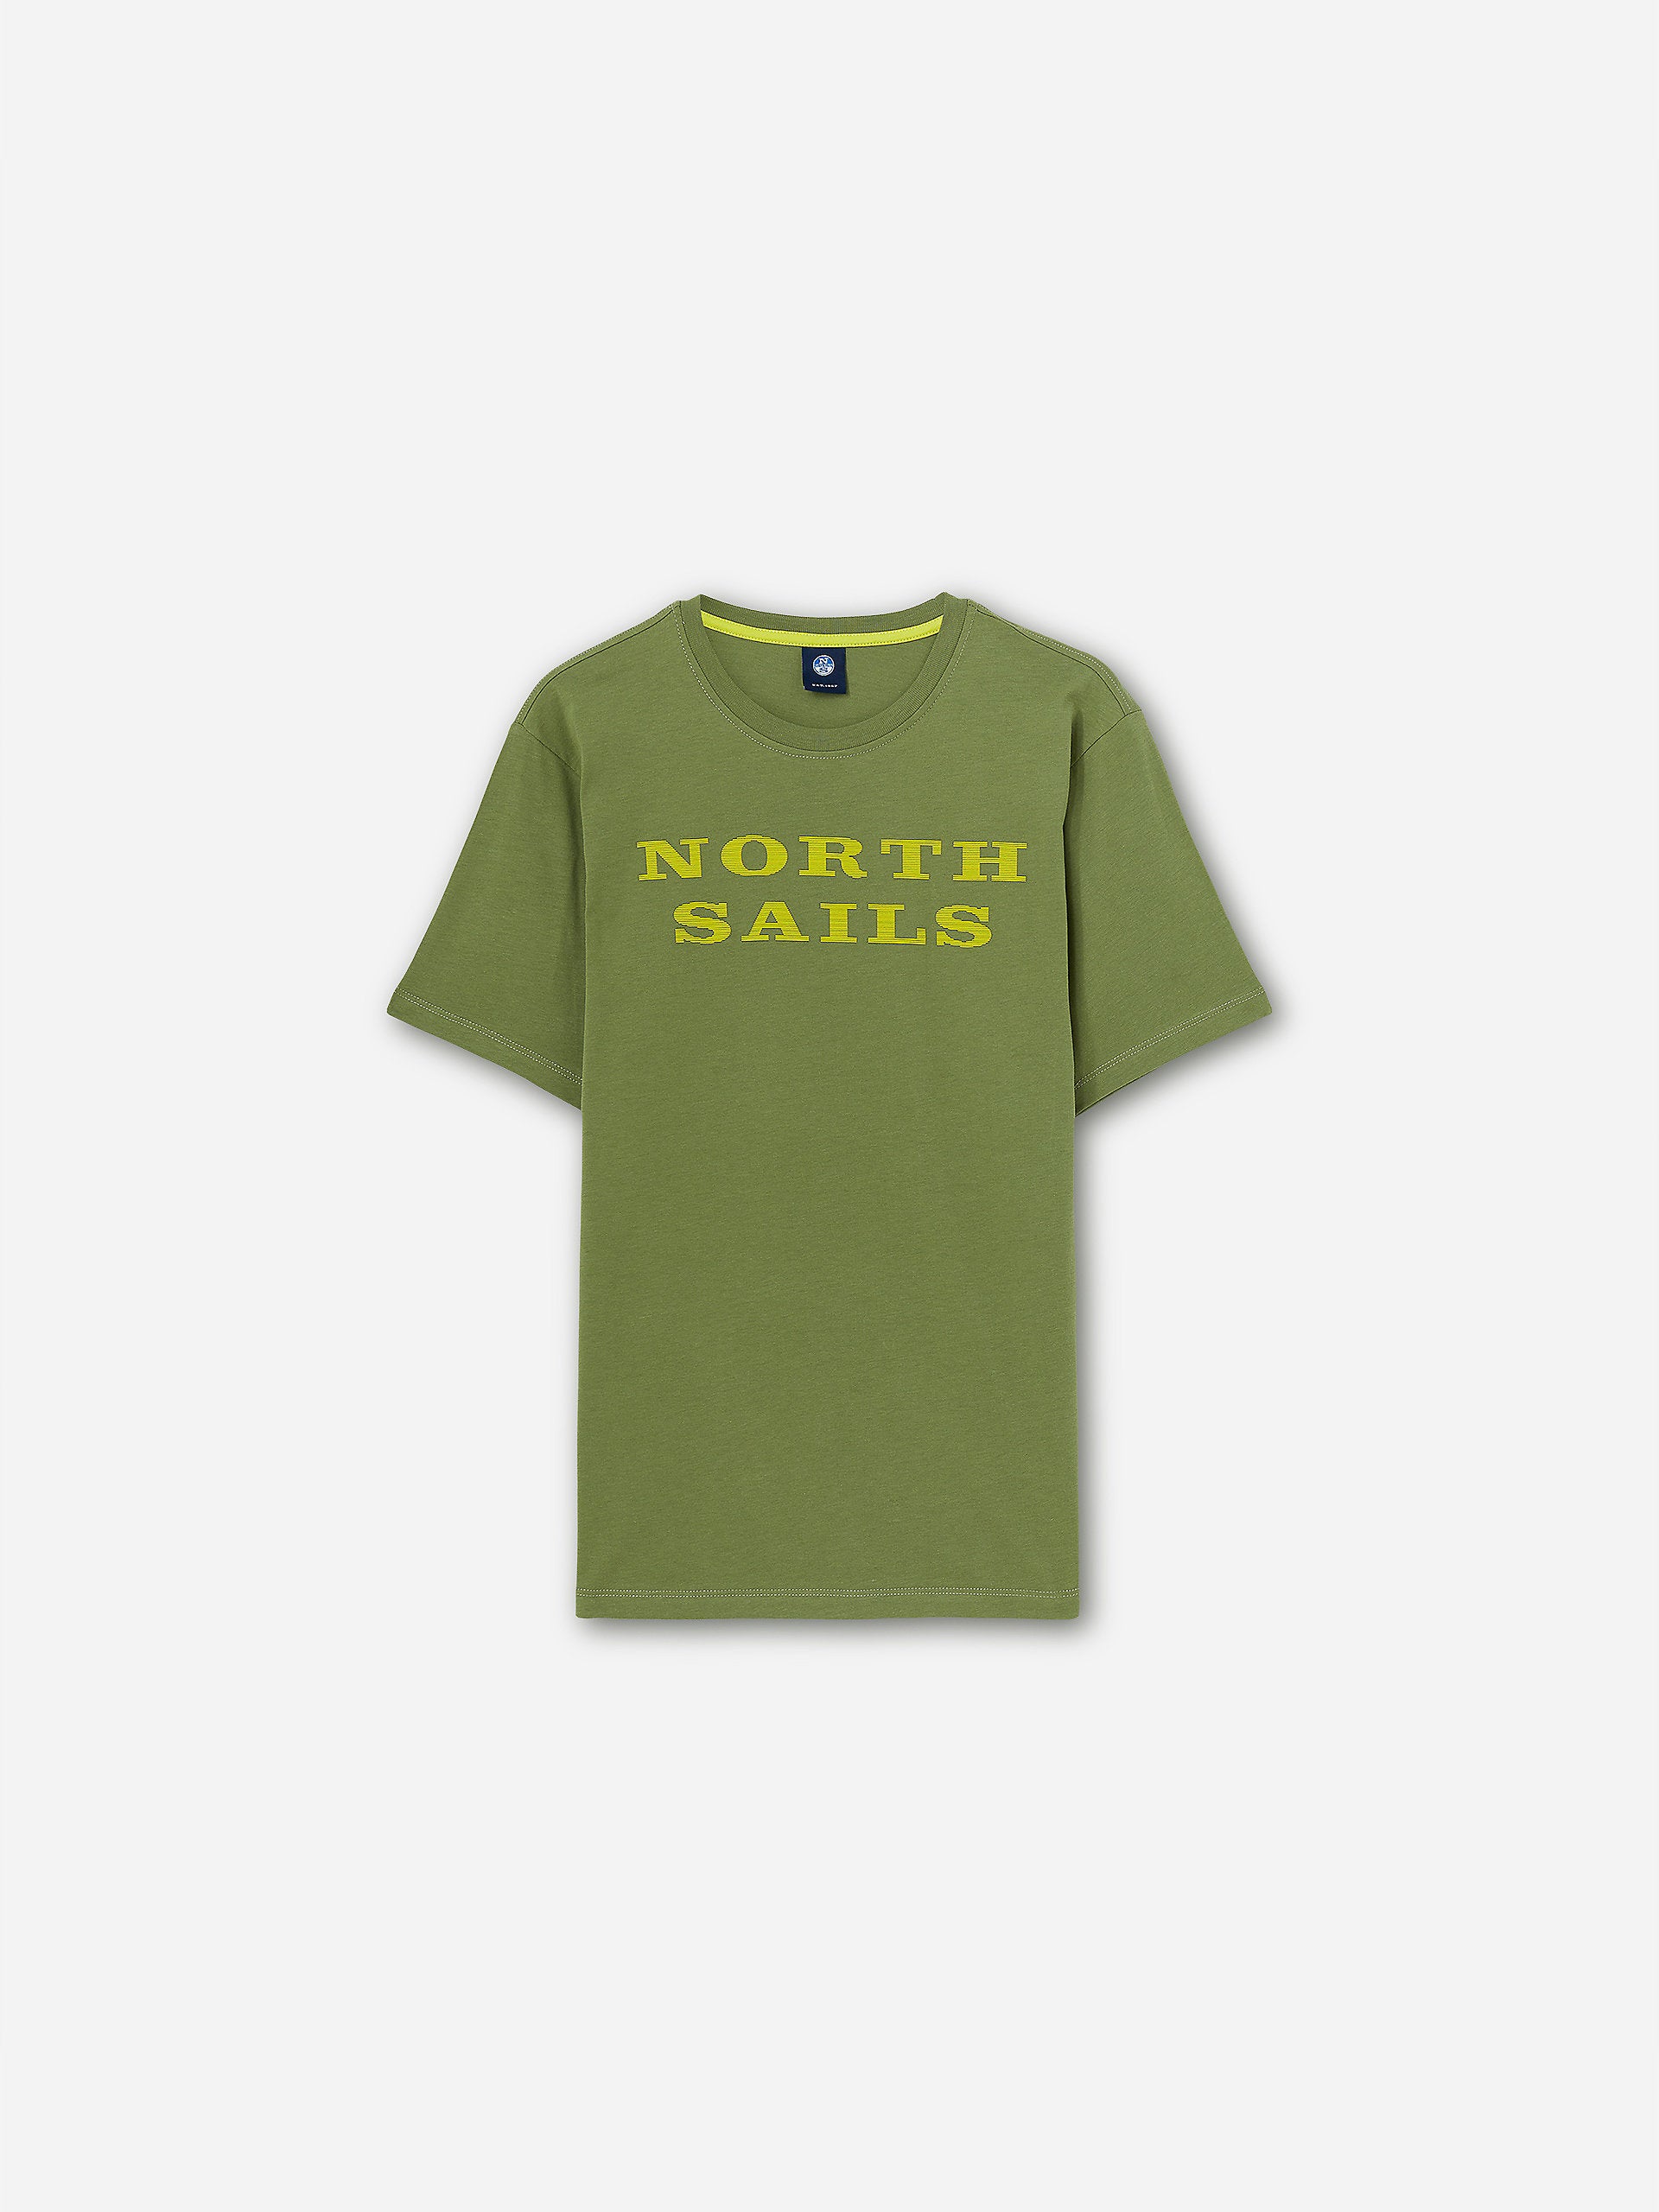 North Sails - T-shirt with letteringNorth SailsOlive green3XL